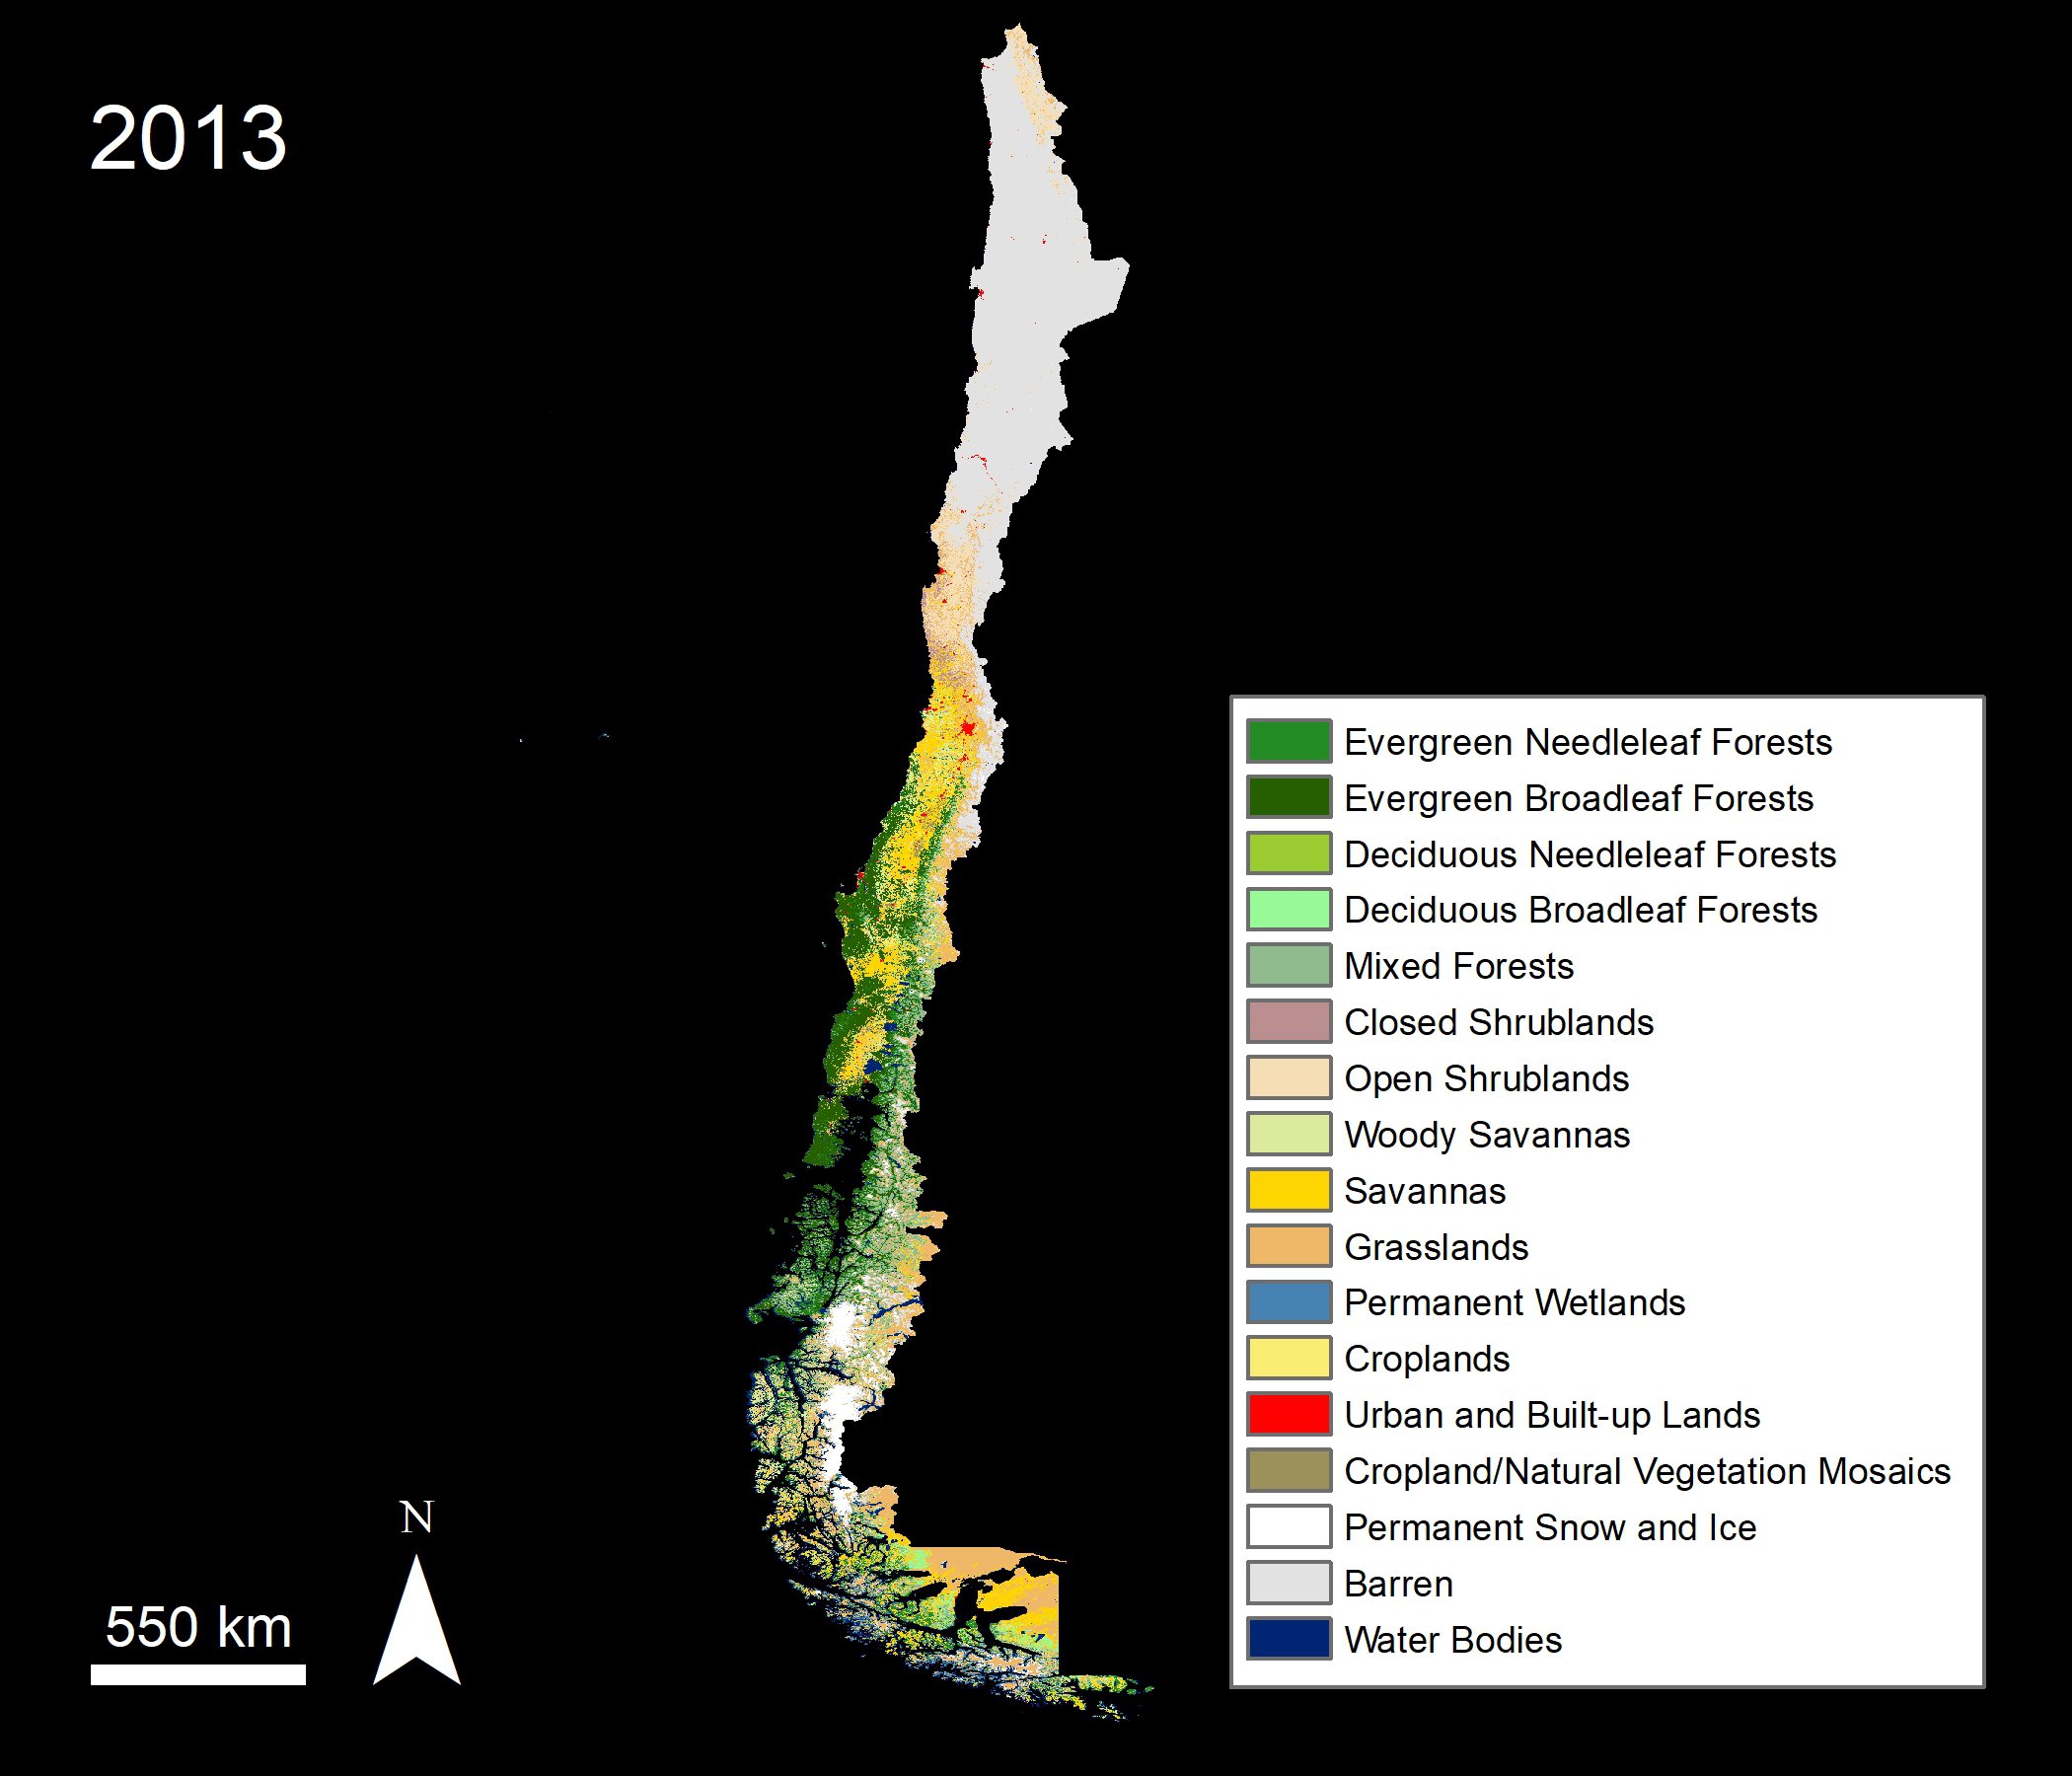 Combined MODIS Land Cover data over Chile, acquired in 2013.